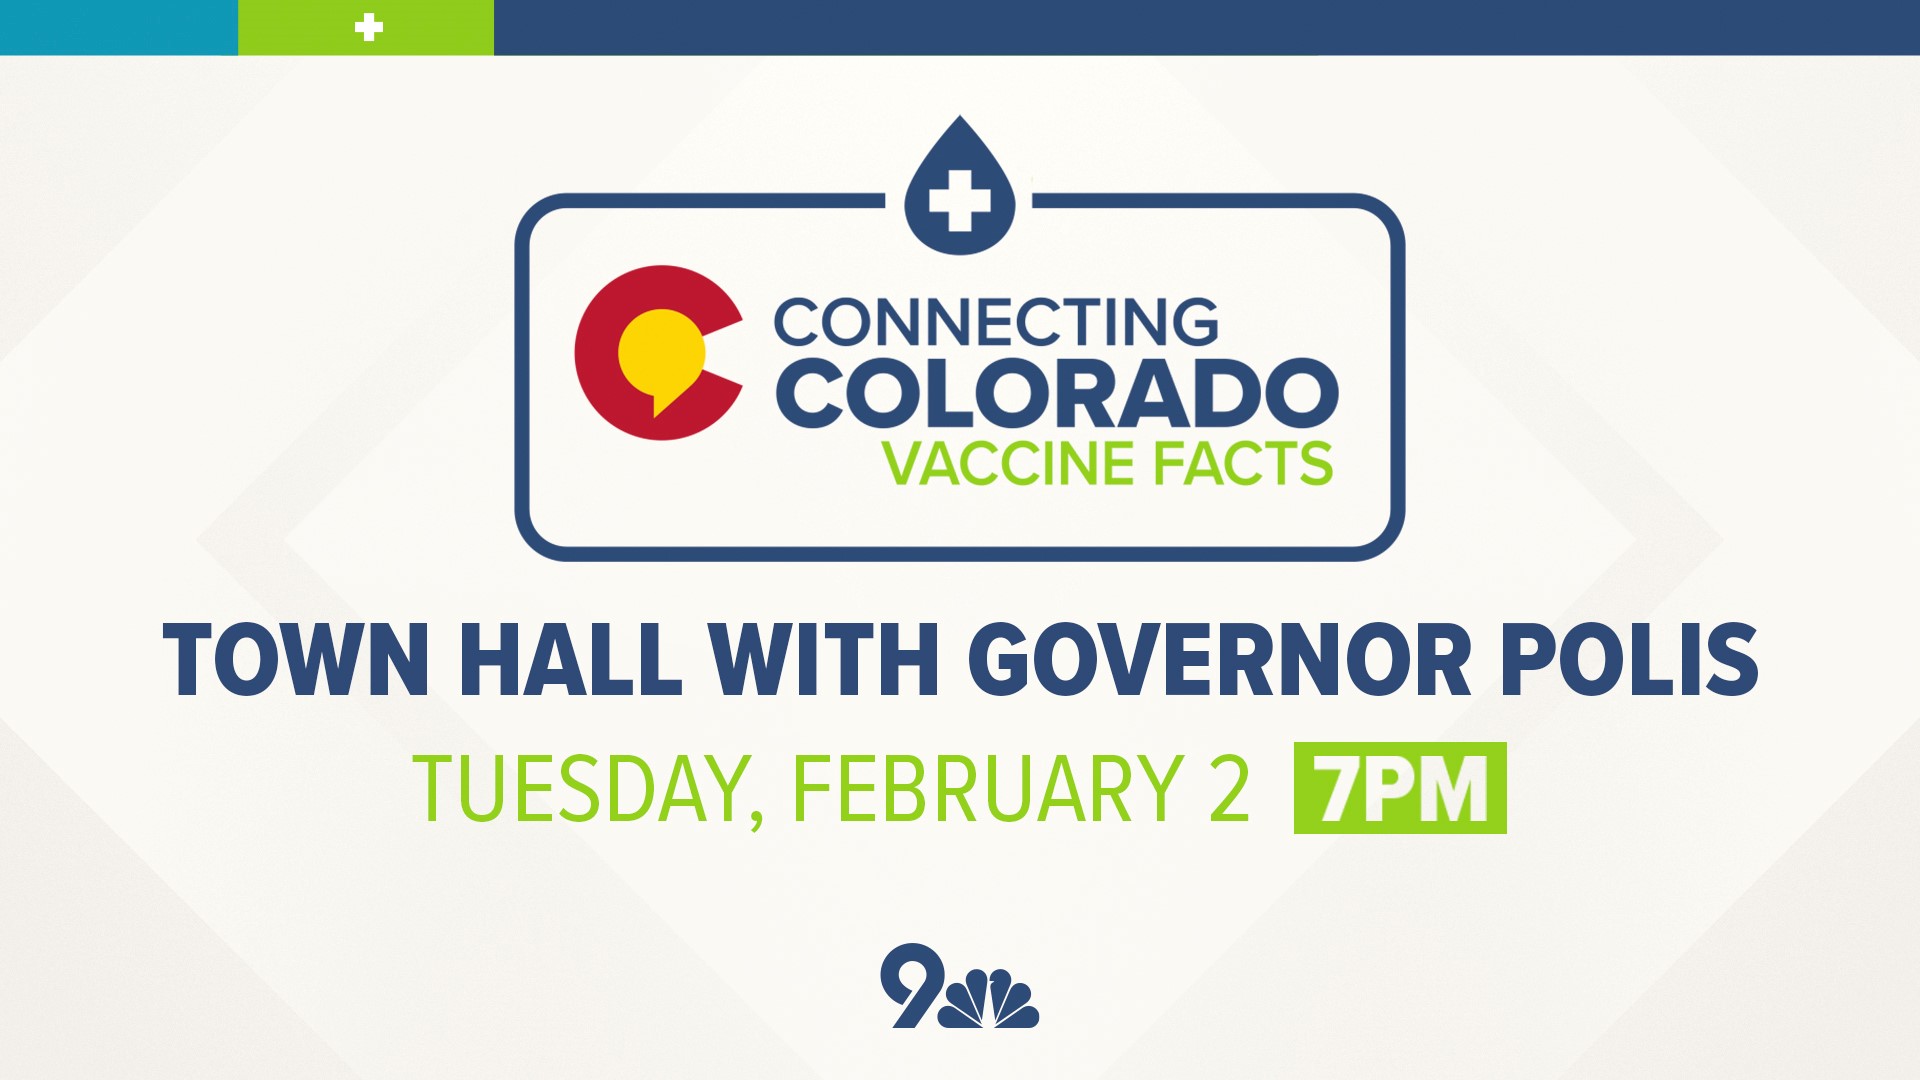 Governor Polis and vaccine experts join 9NEWS for a live town hall that will be available statewide Tuesday evening.